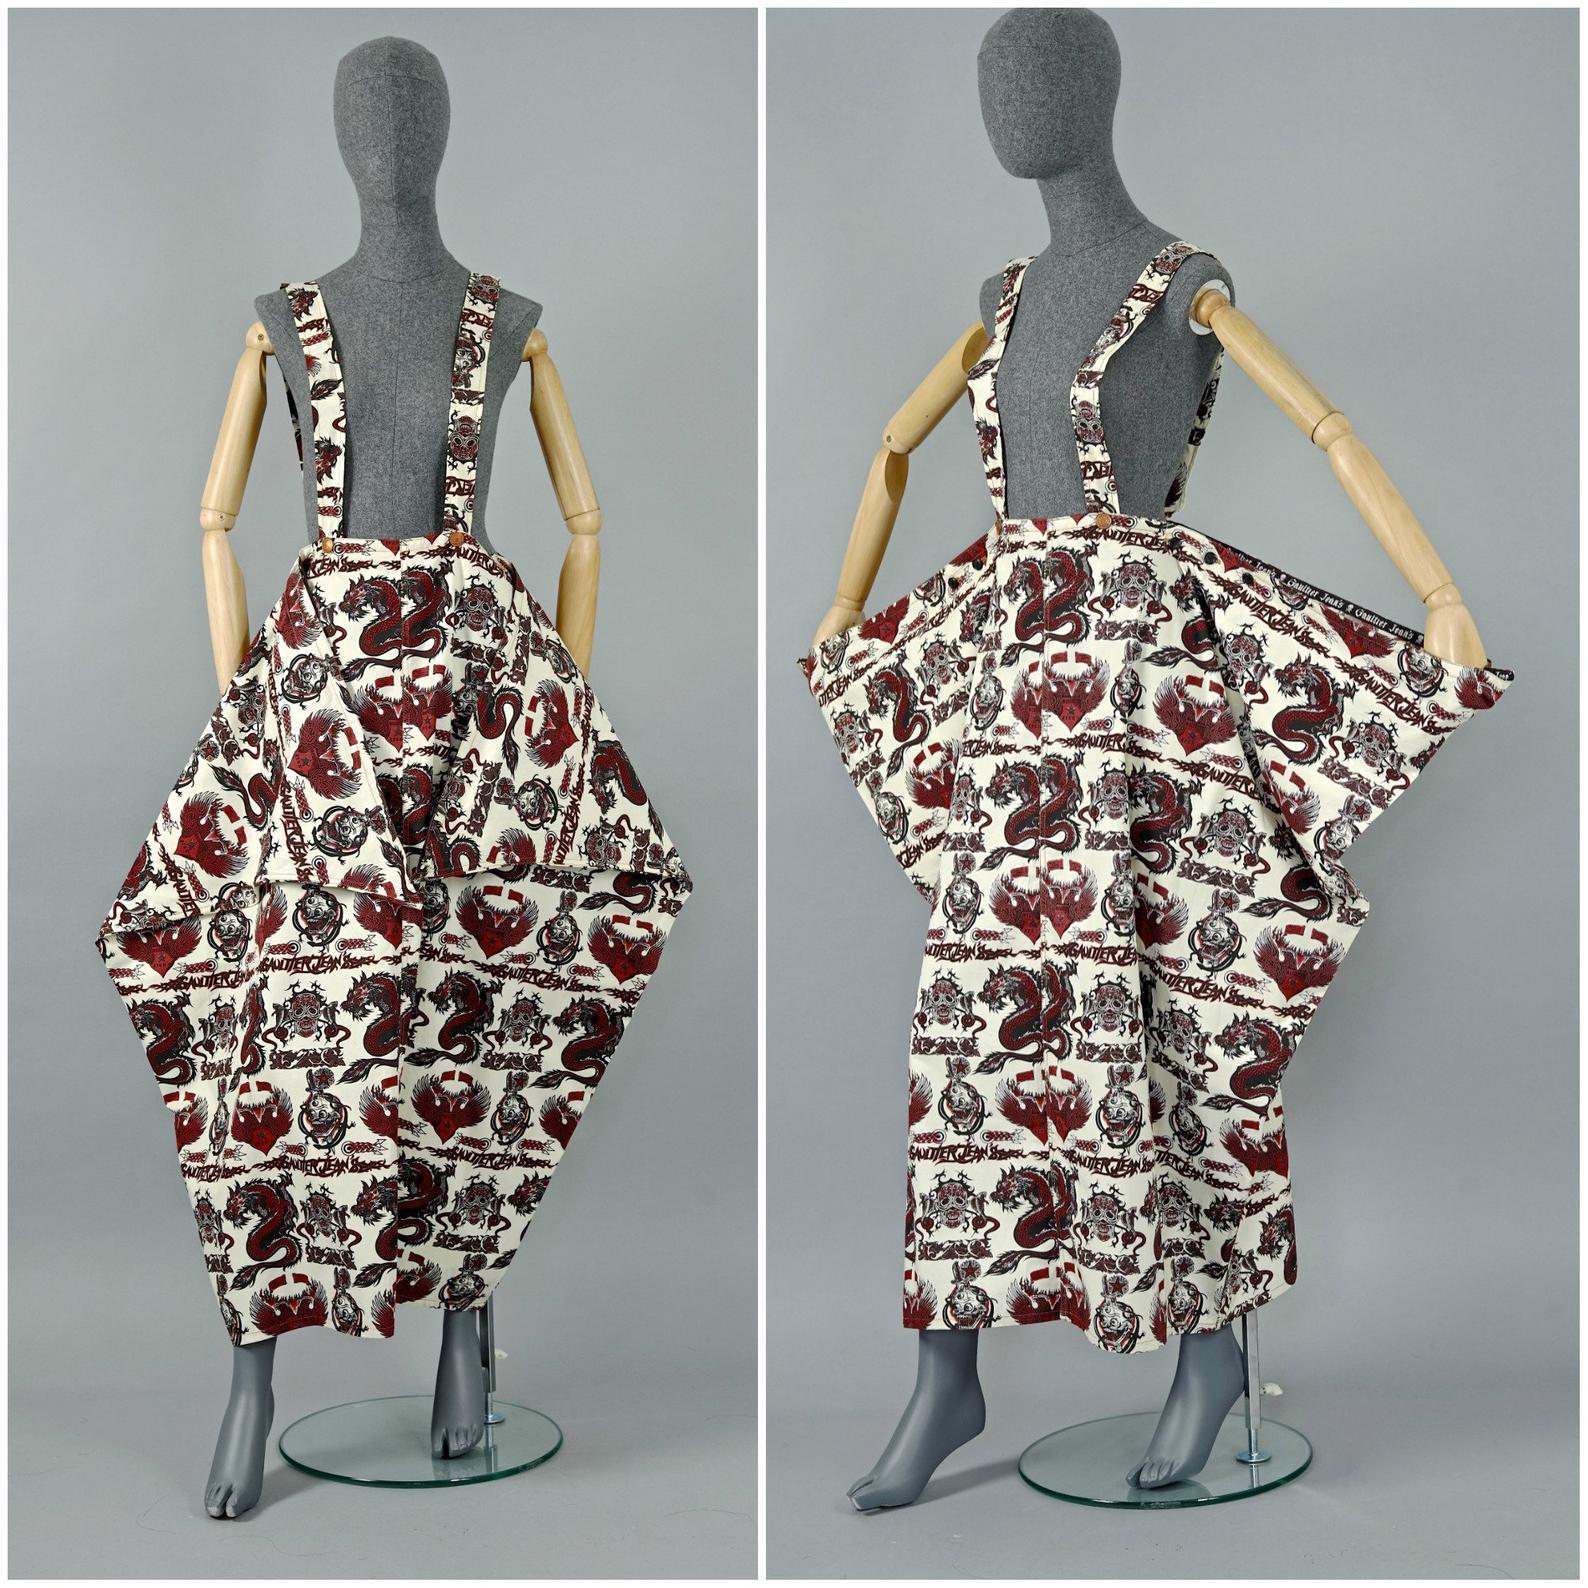 Vintage JEAN PAUL GAULTIER Dragon Skull Eagle Tattoo Print Sarong Suspender Skirt

Measurements taken laid flat, please double waist and hips:
Waist: 11.41 inches to 16.14 inches (29 cm to 41 cm)
Hips: FREE
Straps: 31.10 inches to 33 inches (79 cm